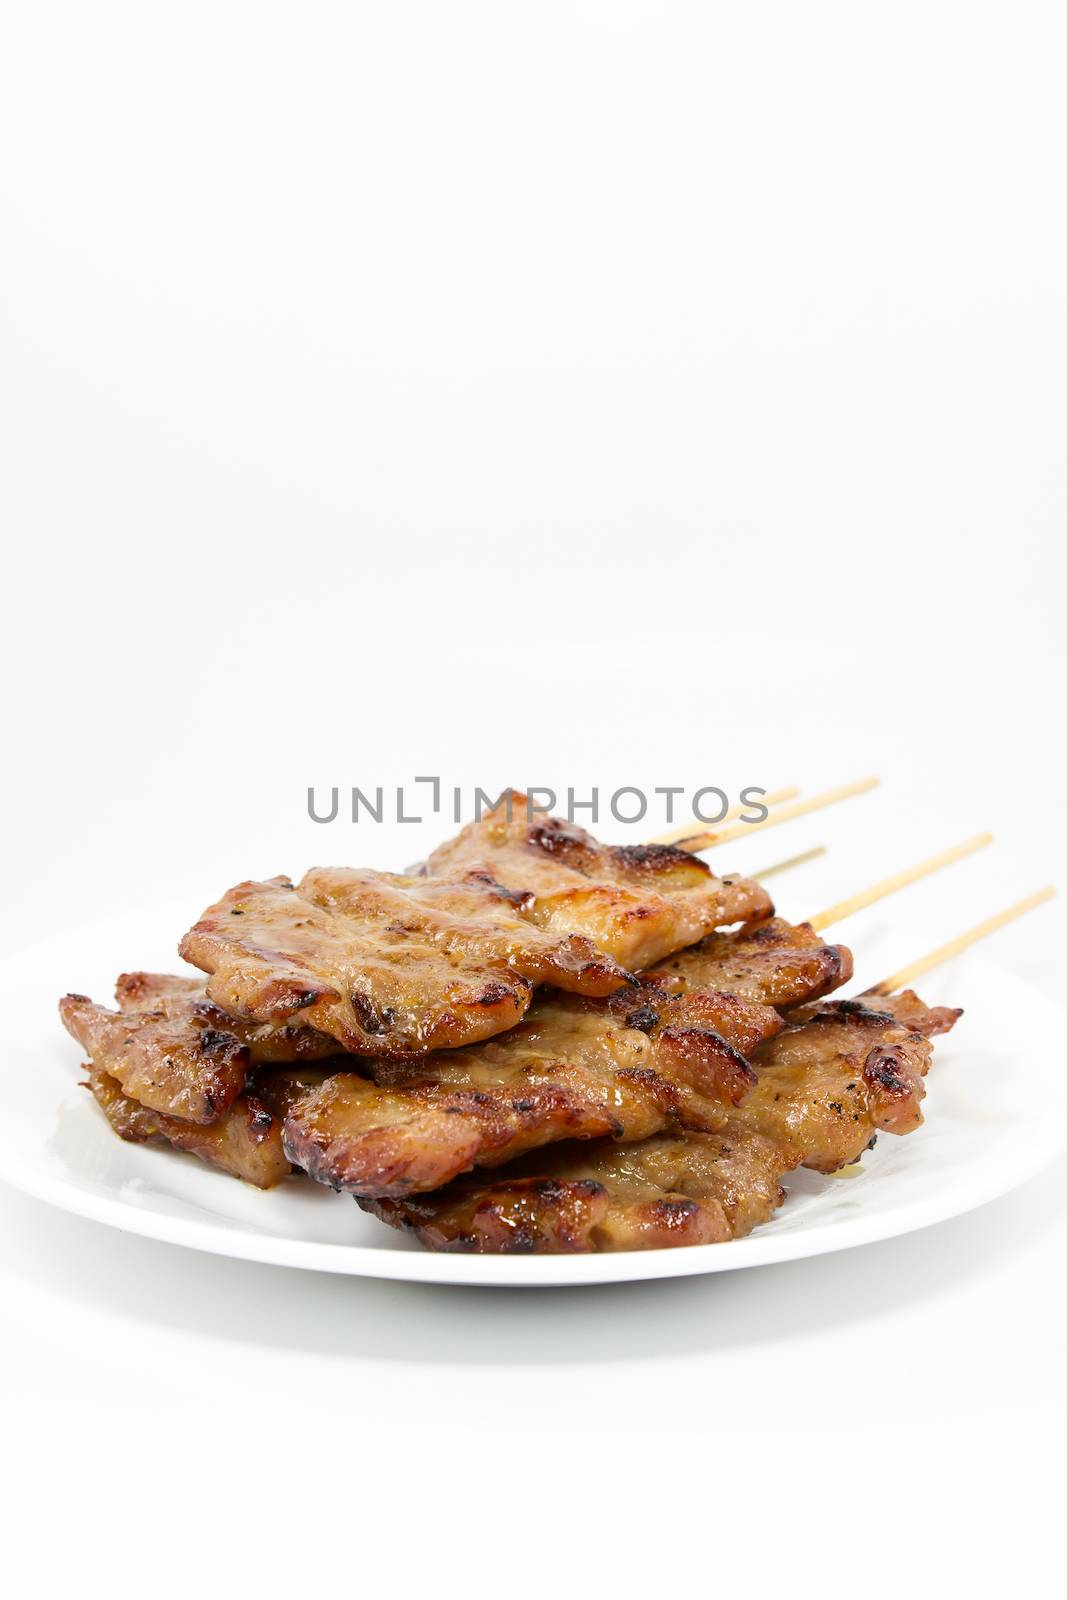 Traditional Thai style grilled pork isolated on white background